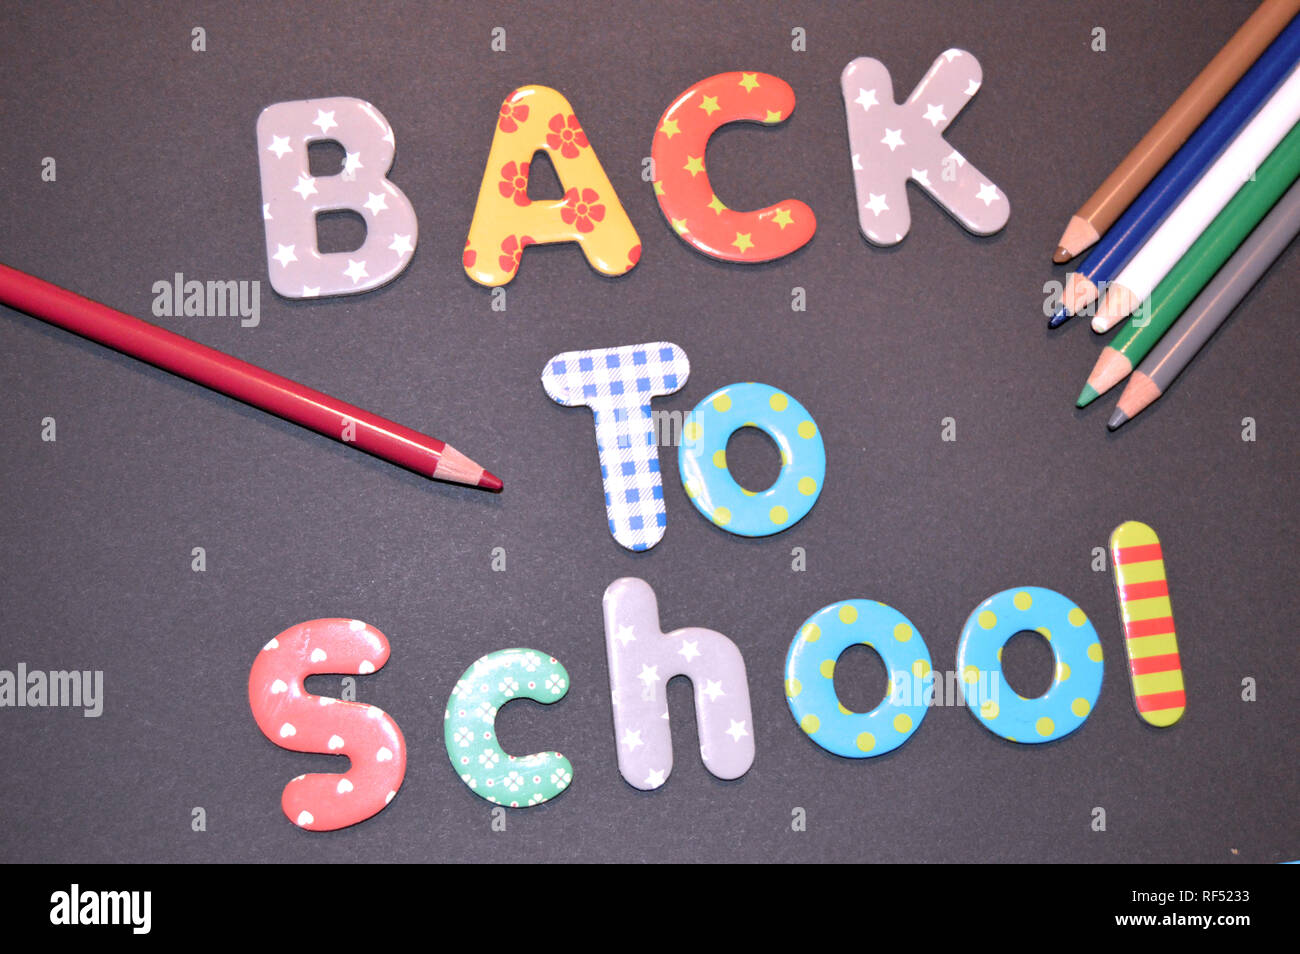 Illustration of the back to school with letters and colored pencils Stock Photo